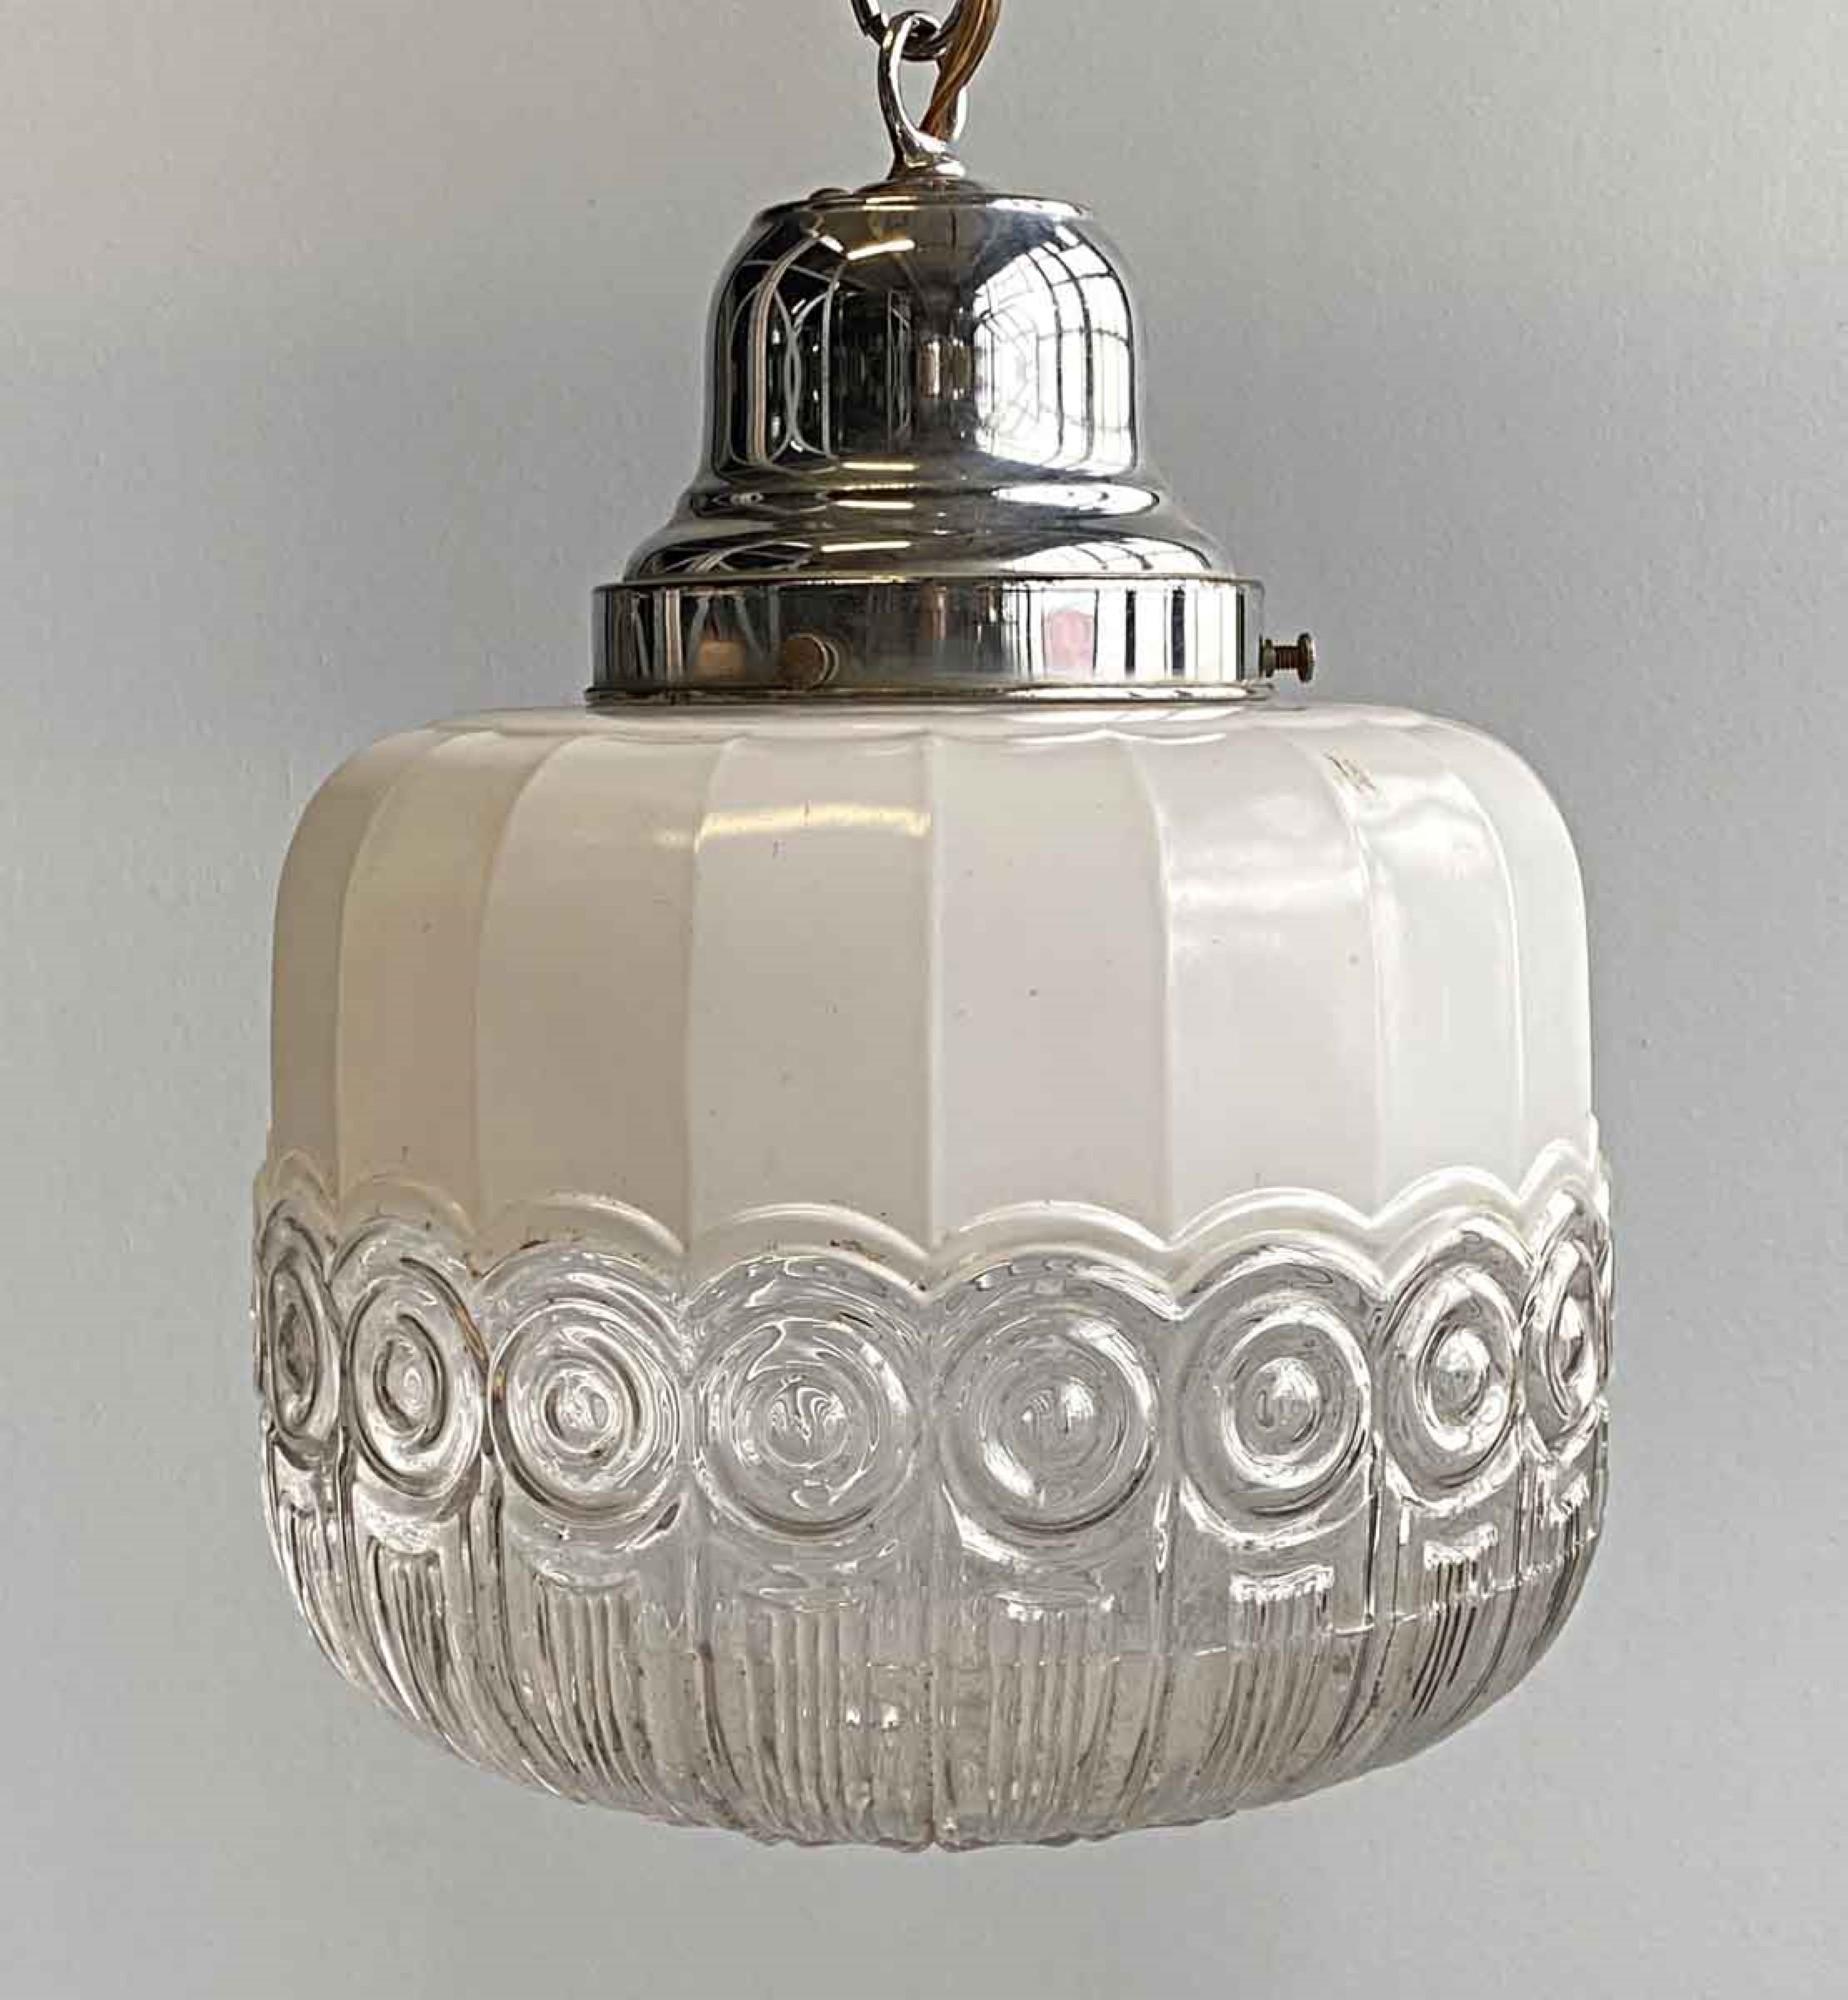 1950s cast glass white and clear globe with unuual swirl detail featuring polished nickel hardware. This can be seen at our 400 Gilligan St location in Scranton. PA.